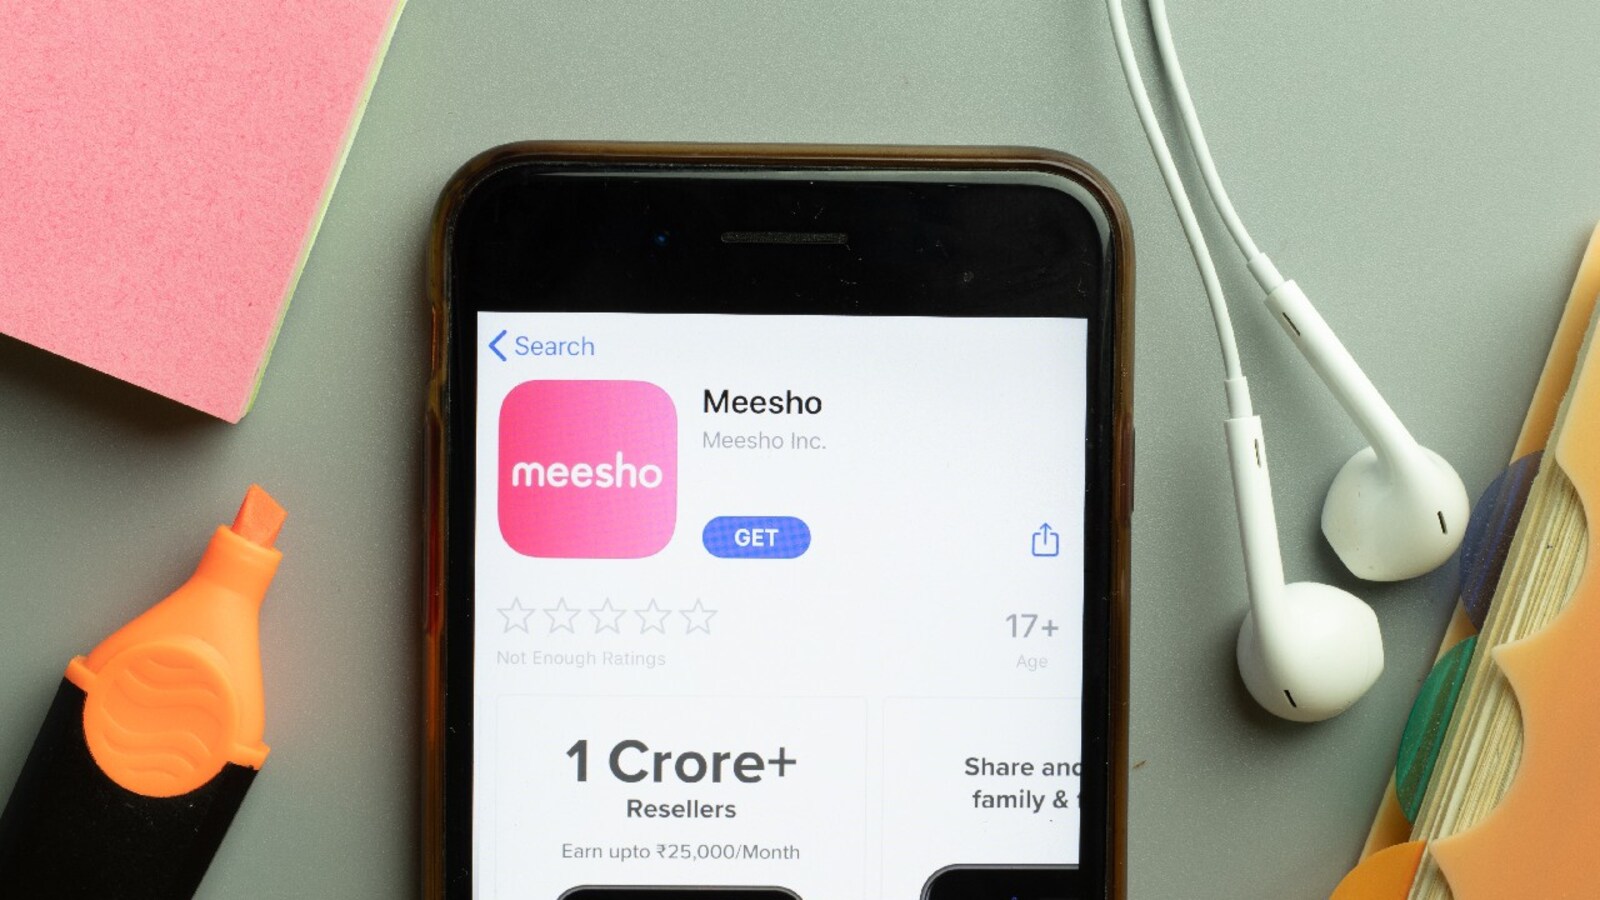 Meesho on TIME's 100 most influential companies